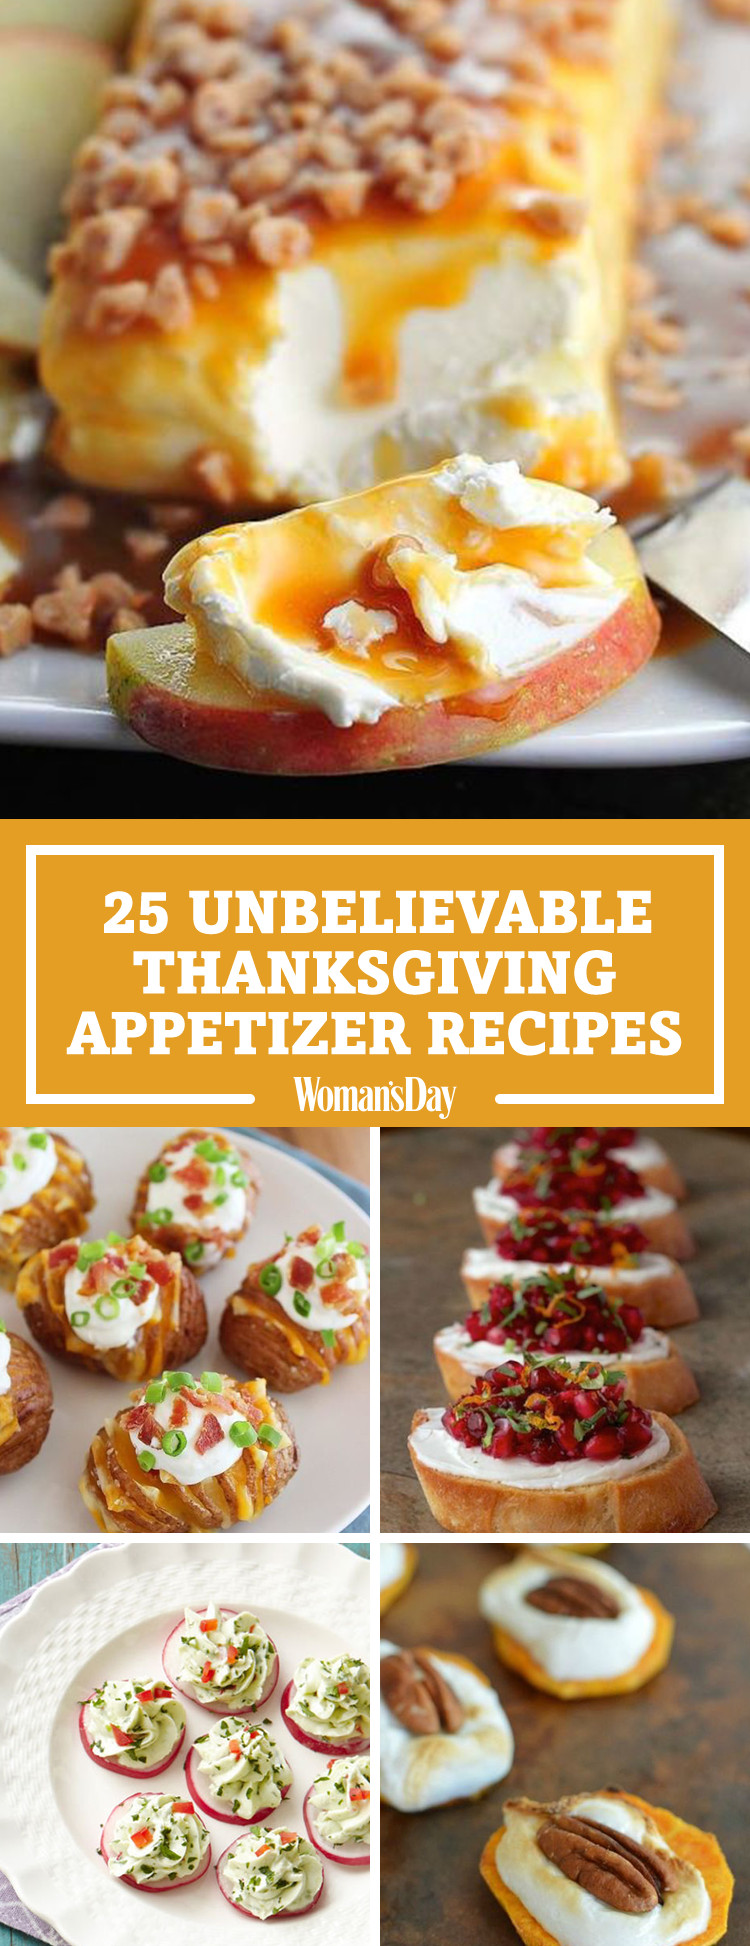 Traditional Thanksgiving Appetizers
 34 Easy Thanksgiving Appetizers Best Recipes for